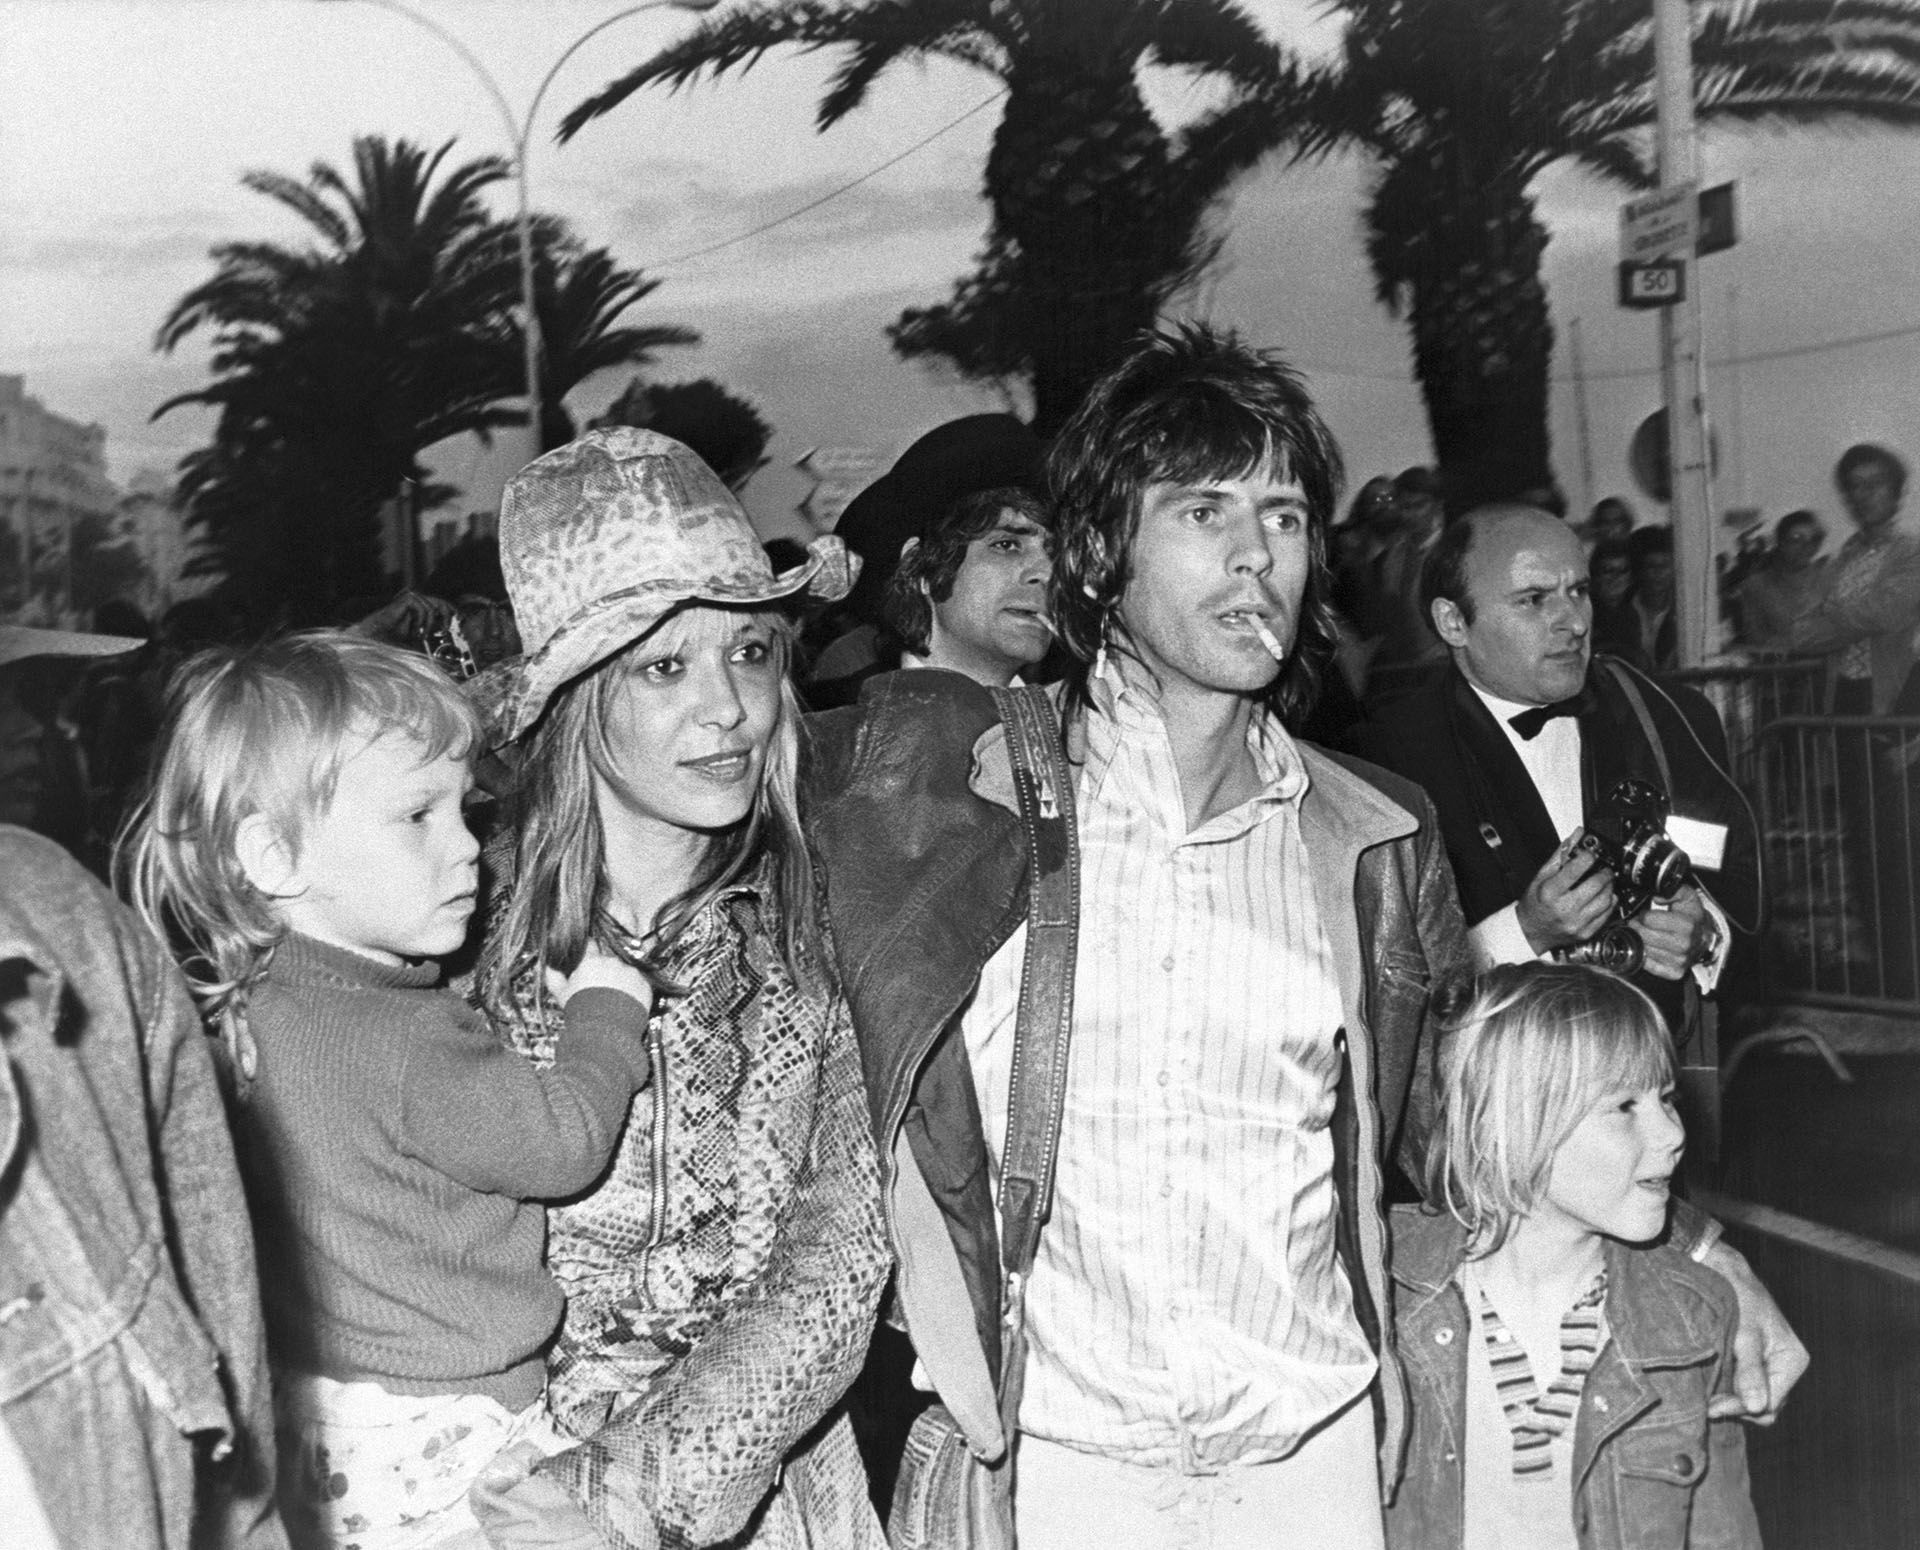 Keith Richards with Anita Pallenberg and their children.  They had originally rented Ville Nellcote to settle after moving from England to avoid tax pressure.  But then the basement of the property became Exile on Mail Street's recording studio and the home of the whole band.